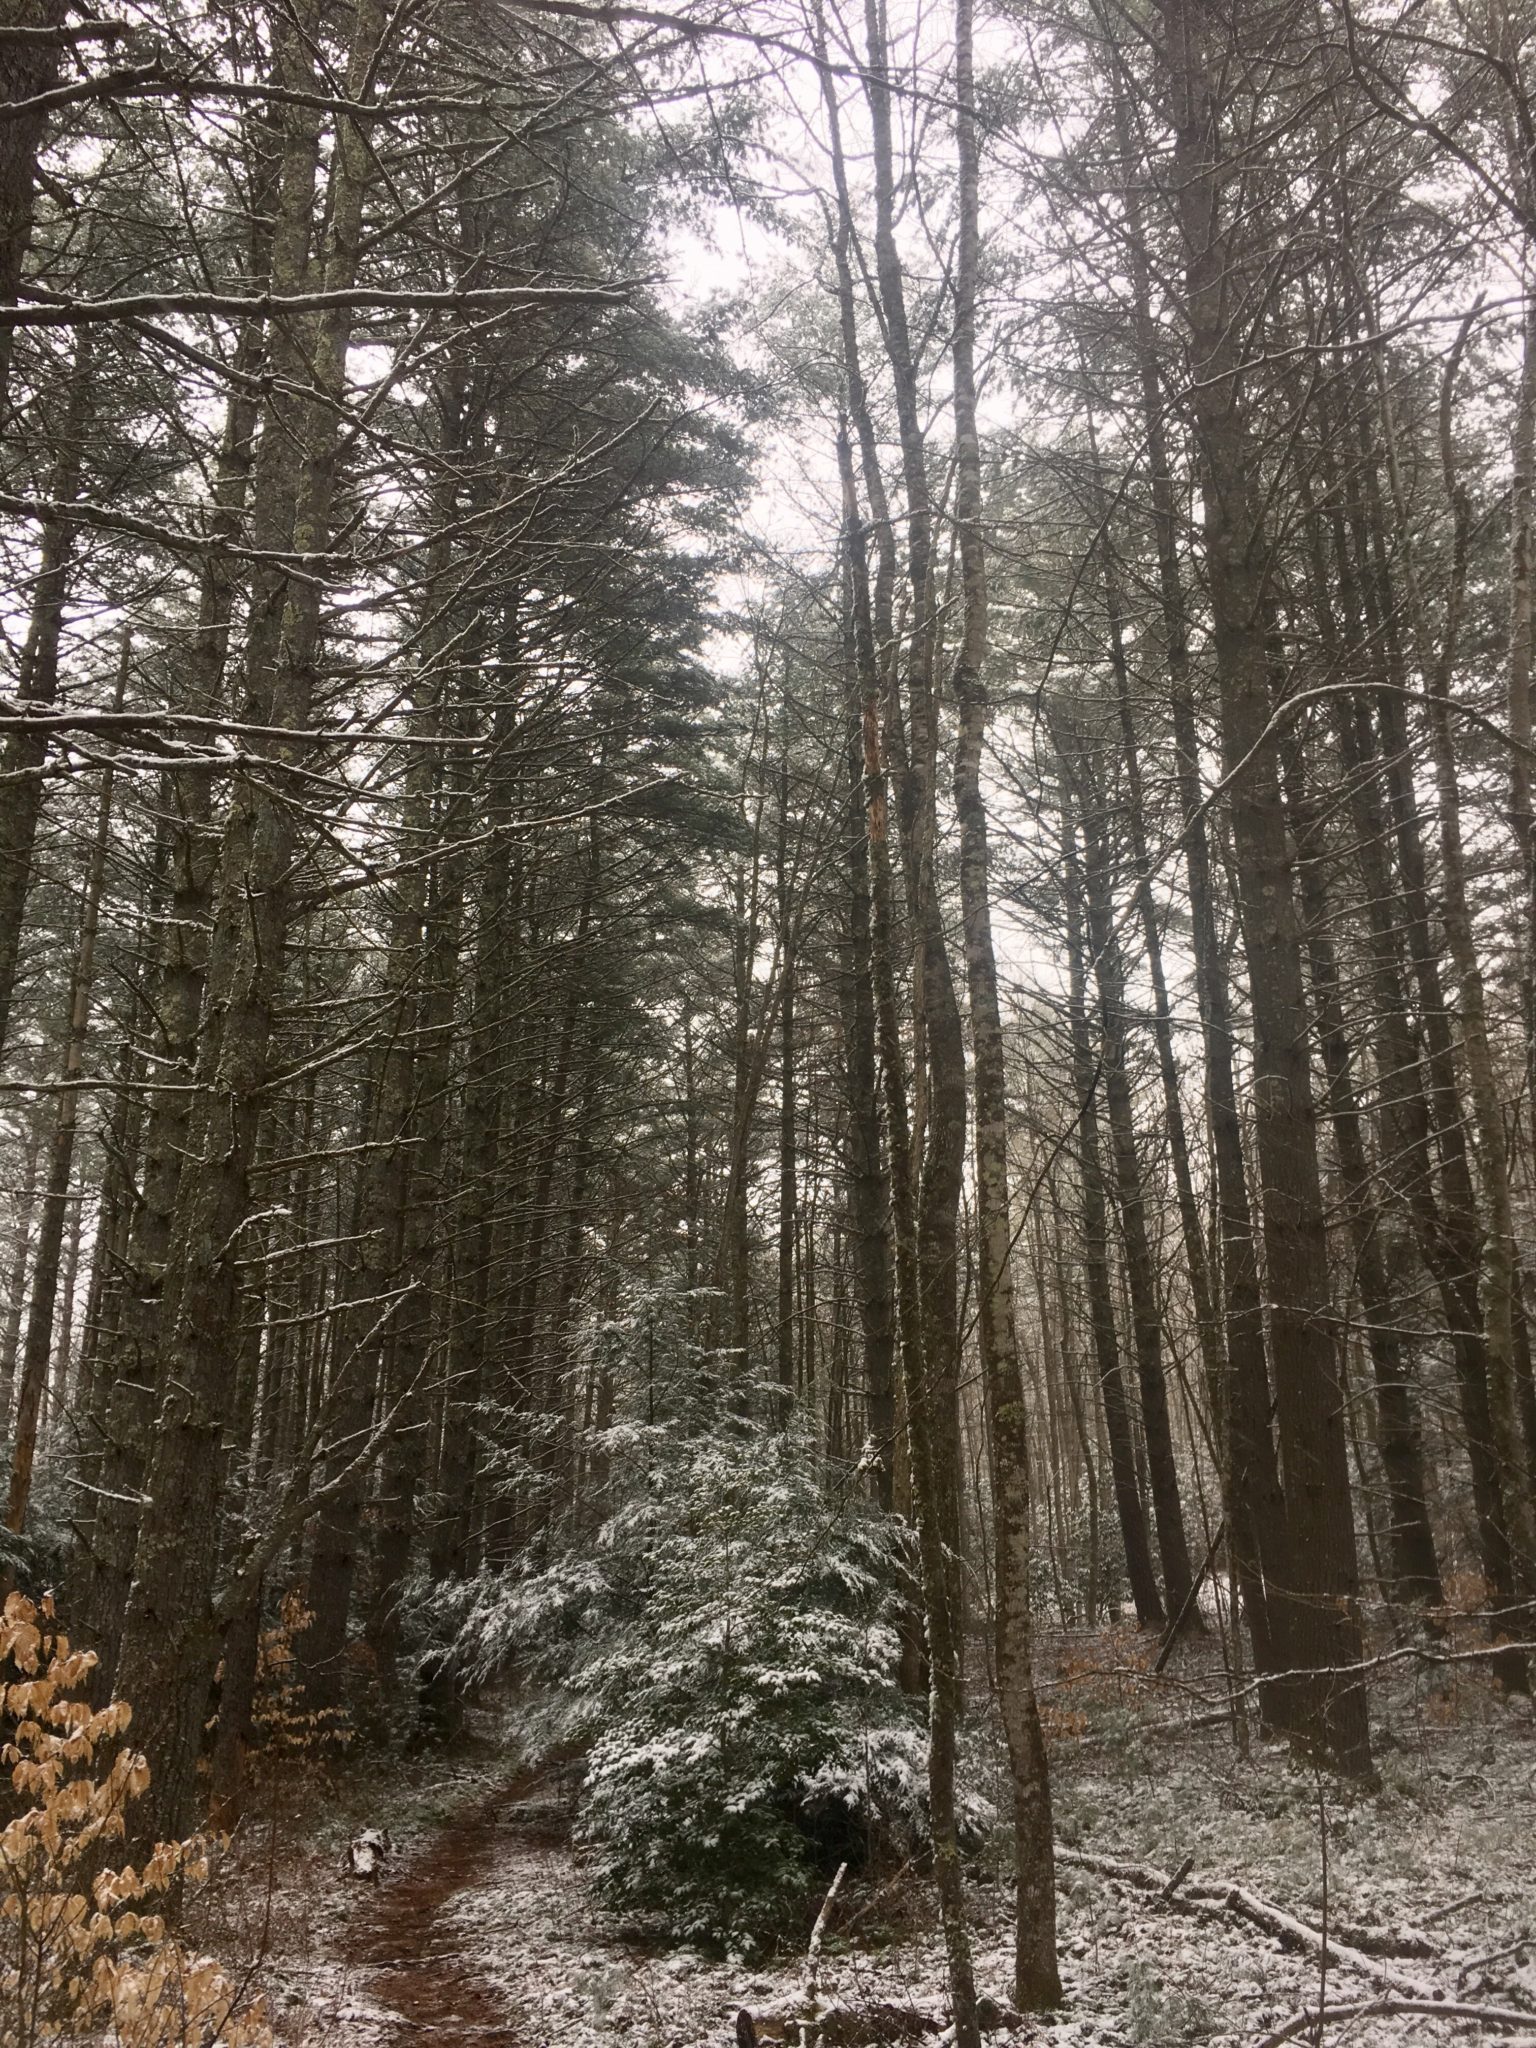 A wet, snowy forest